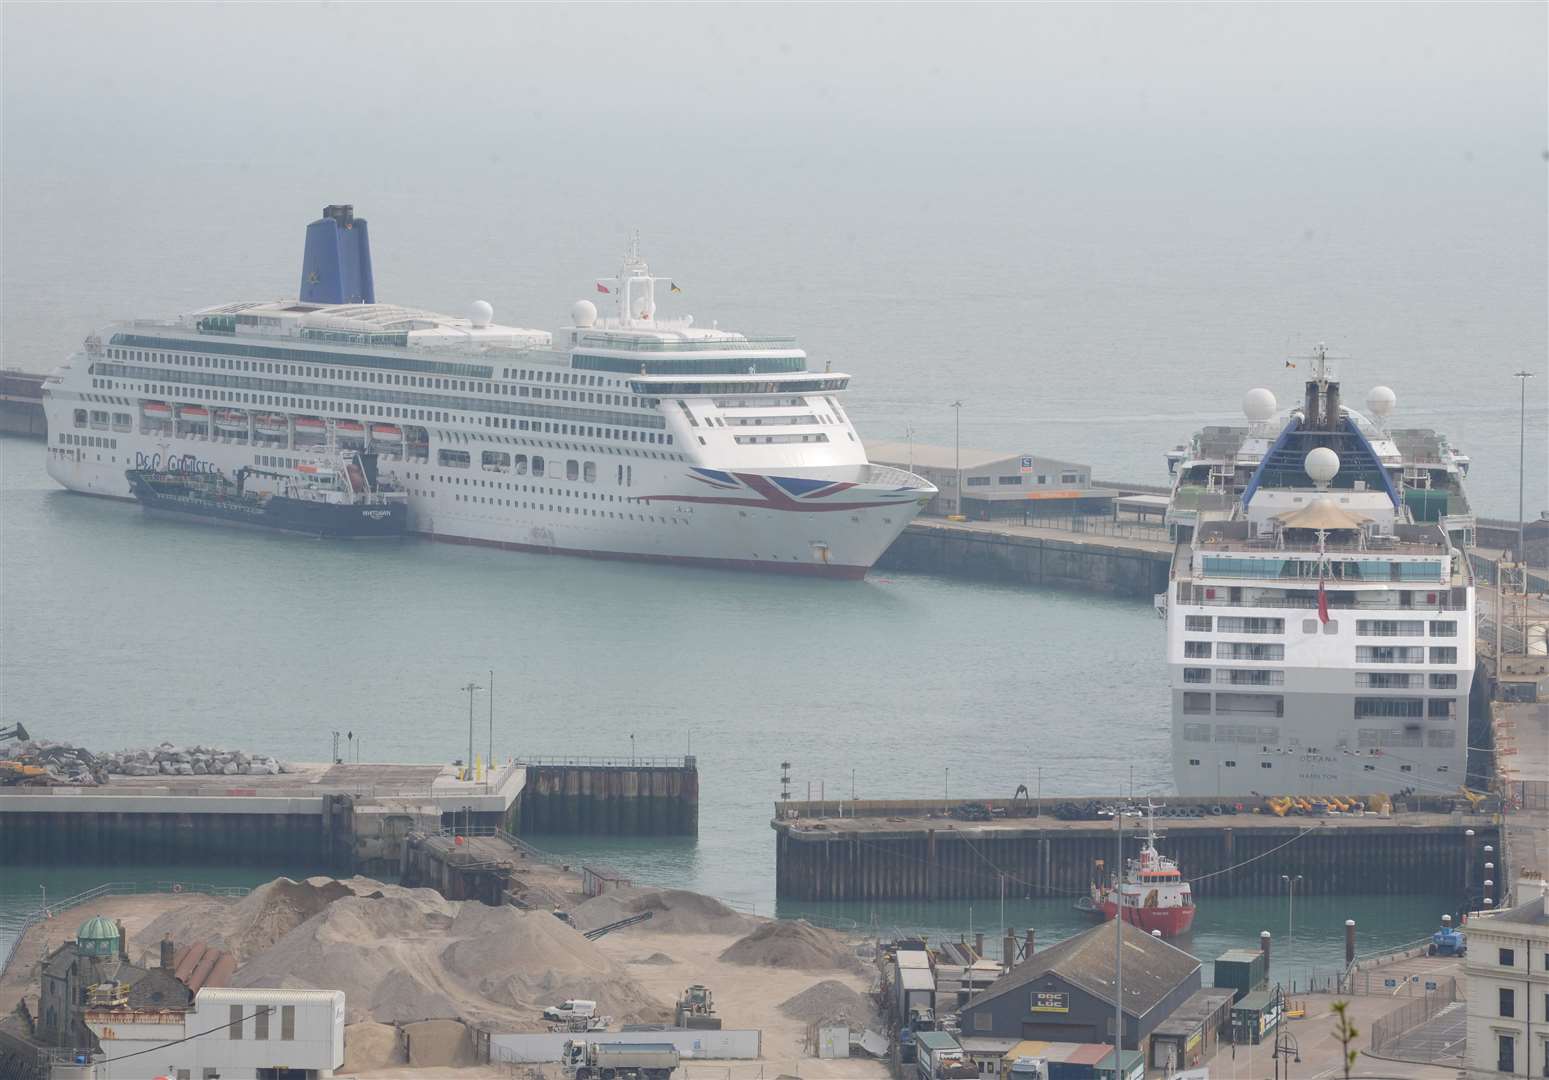 Cruise ships at the Port of Dover bring “very obvious economic benefits”, according to bosses